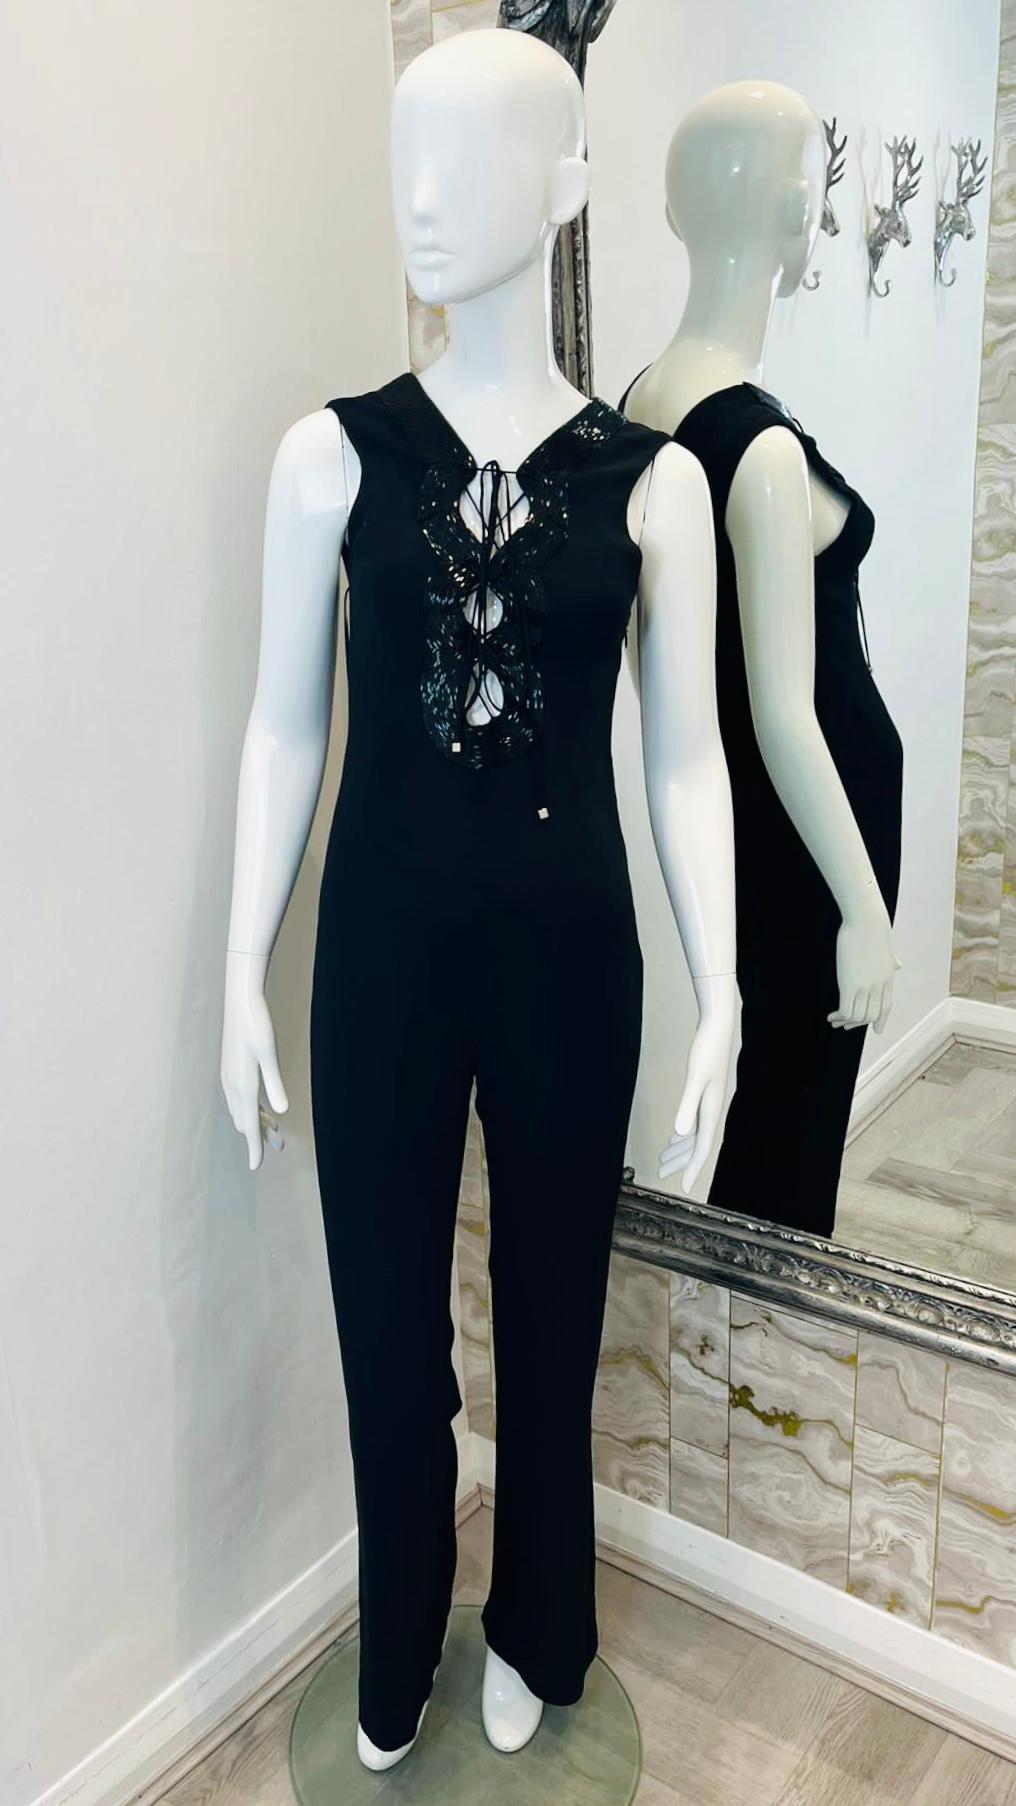 Emilio Pucci Lace-Up Silk Blend Jumpsuit

Black,, sleeveless jumpsuit designed with lace-up detailing to the front trimmed with wide, black beaded strap.

Featuring slim fit silhouette, flared leg and deep V-neck to rear.

Size – 40IT

Condition –